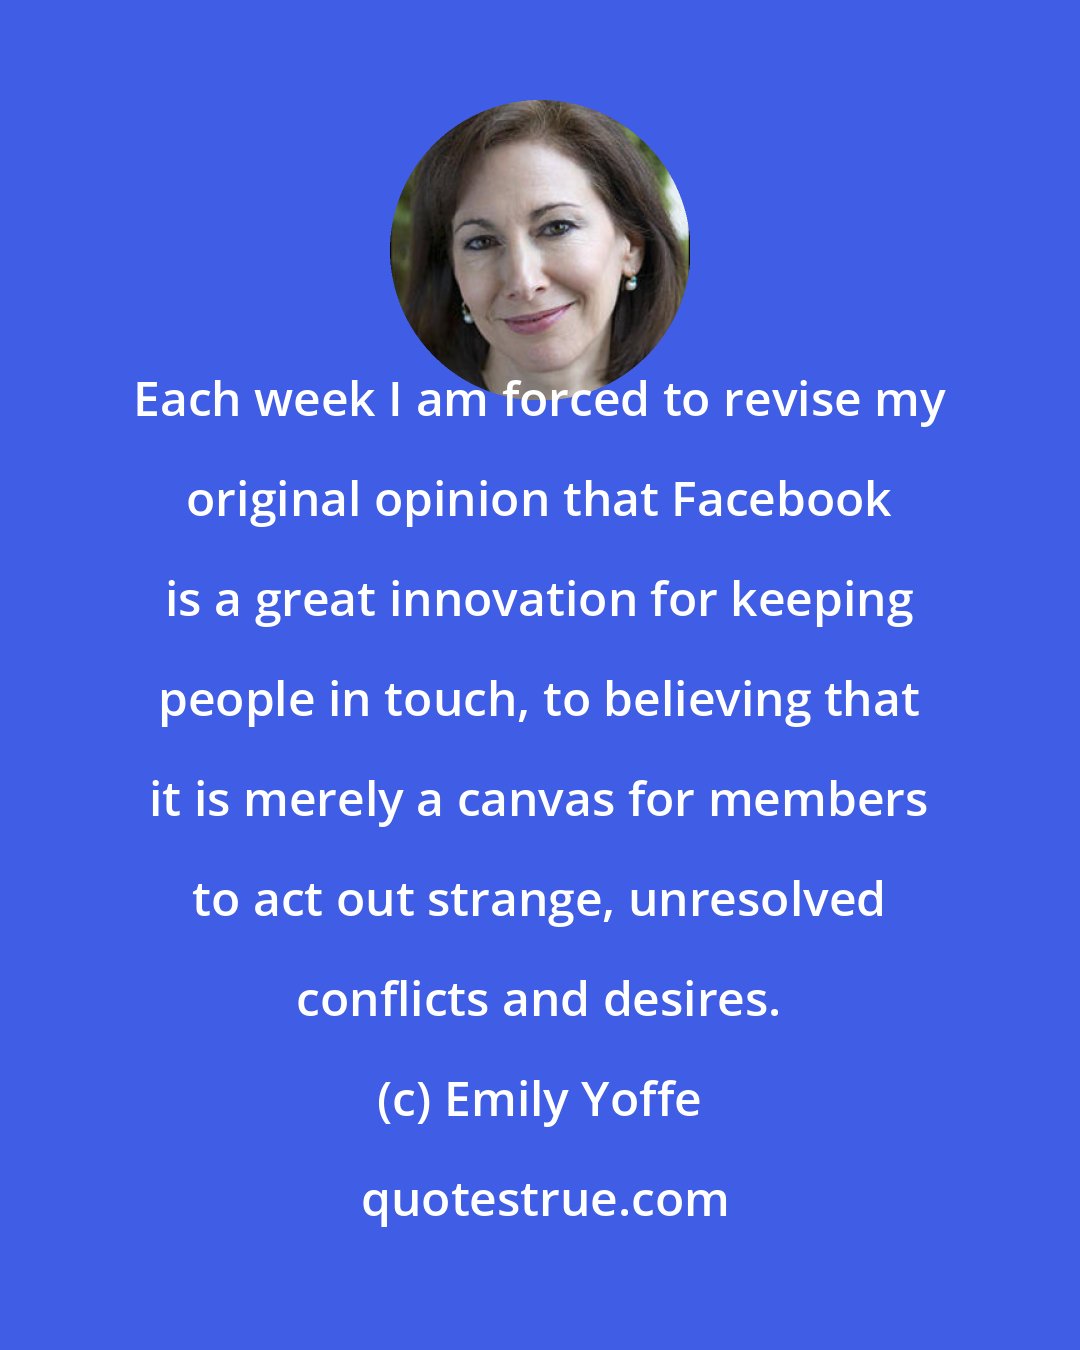 Emily Yoffe: Each week I am forced to revise my original opinion that Facebook is a great innovation for keeping people in touch, to believing that it is merely a canvas for members to act out strange, unresolved conflicts and desires.